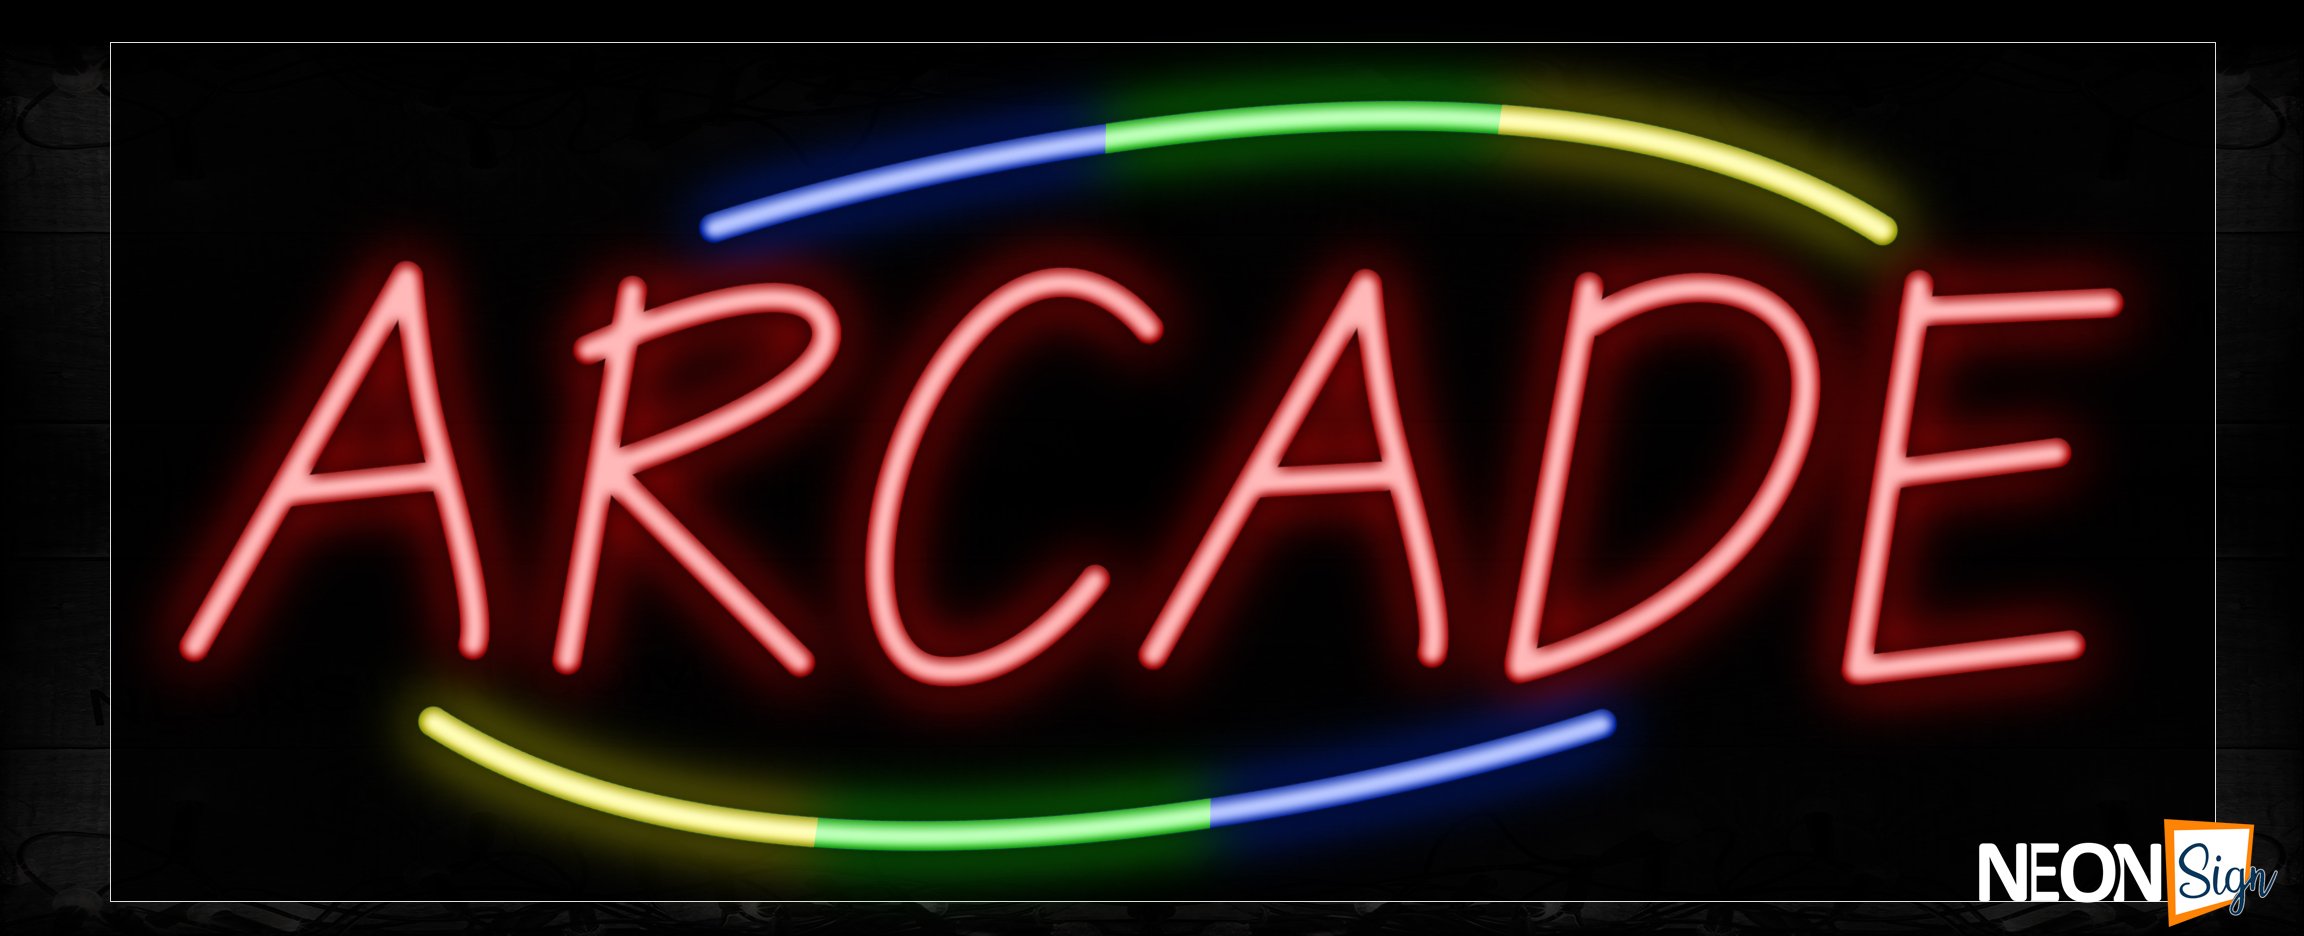 Image of 10729 Arcade with colorful arc border Neon Sign_13x32 Black Backing